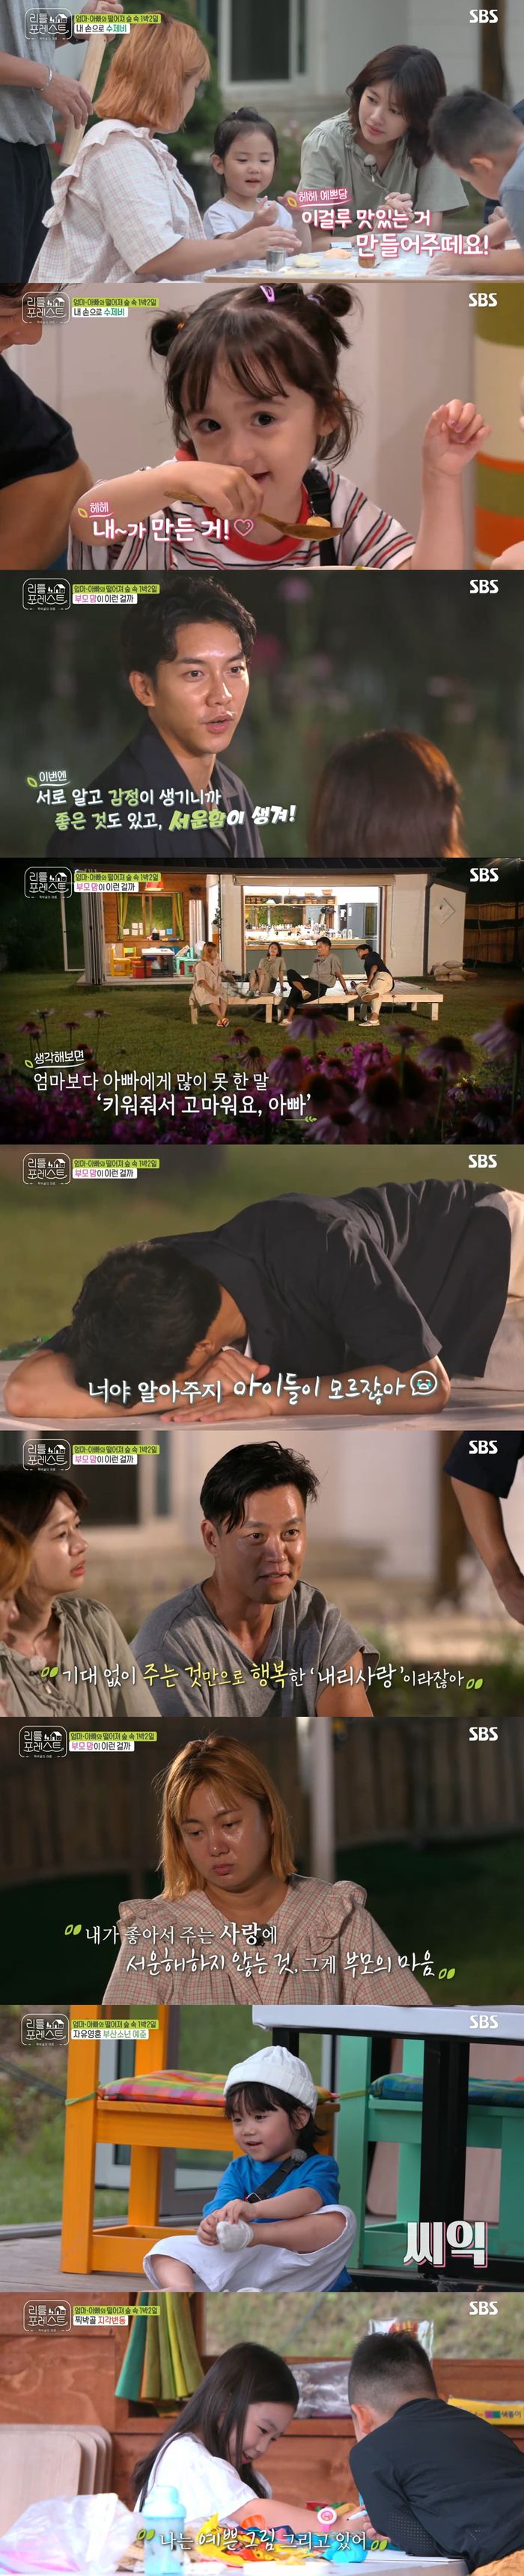 Little Forest members sympathized with their parents in the second parting.On SBS Little Forest broadcast on the last three days, a second farewell with Little Lee (children) and a third meeting with two new friends were drawn.After a dip in Valley, Lee Hyun, Brooke and Grace fell asleep.Jeonghan, Lee Han-yi had a romantic time talking about rising up with Uncle Lee Seung-gi while looking at the sky.Lee Seung-gi said, I think of a bean-bi-ji stew, while Jung Han-i said, Popcorn comes up, and Lee Han-i said, It is a Dracula shape.Lee Seo-jin prepared Sujebi, which utilized the remaining white soup, as a lunch menu; Little also added fern hand and participated in making Sujebi himself.Littles were interested in the strange touch and shot hearts and star-shaped Sujebi.The thick chicken soup Sujebi was completed and the little ones started to eat more deliciously with the pride that they made it themselves.However, Lee Han-yi was unable to eat unlike usual due to his stamina, and he got up first and worried about everyone.The second breakup time came with Littles. Littles went back to their parents and the members talked.Lee Seung-gi said, I know each other with my children and have feelings, so I have good things, but I feel sad. I thought why I do not know my heart.Lee Seo-jin said, Children are love, I like it, so I should not be sorry.Then came the third meeting day at Tjakbakgol, where four-year-old Busan boy Ye Jun-yi and six-year-old Gaon-yi joined the new meeting.As soon as Yejun came, he took off his socks and walked through the ball, showing a free soul.Another new Friend Gaon boasted of his eldest sisters brilliance, such as a lively greeting to the camera and running around after a flying butterfly.Lee Han approached the new Friend Gaon, who was embarrassed to tell his name and play with Gaon, and the members said, Lee Han went to Gaon in Brook.I was so excited. At this time, Brooke appeared and wondered how the triangular relationship between the three little girls who fell alone would lead to Lee Han.Little Forest is broadcast every Monday and Tuesday at 10 pm.